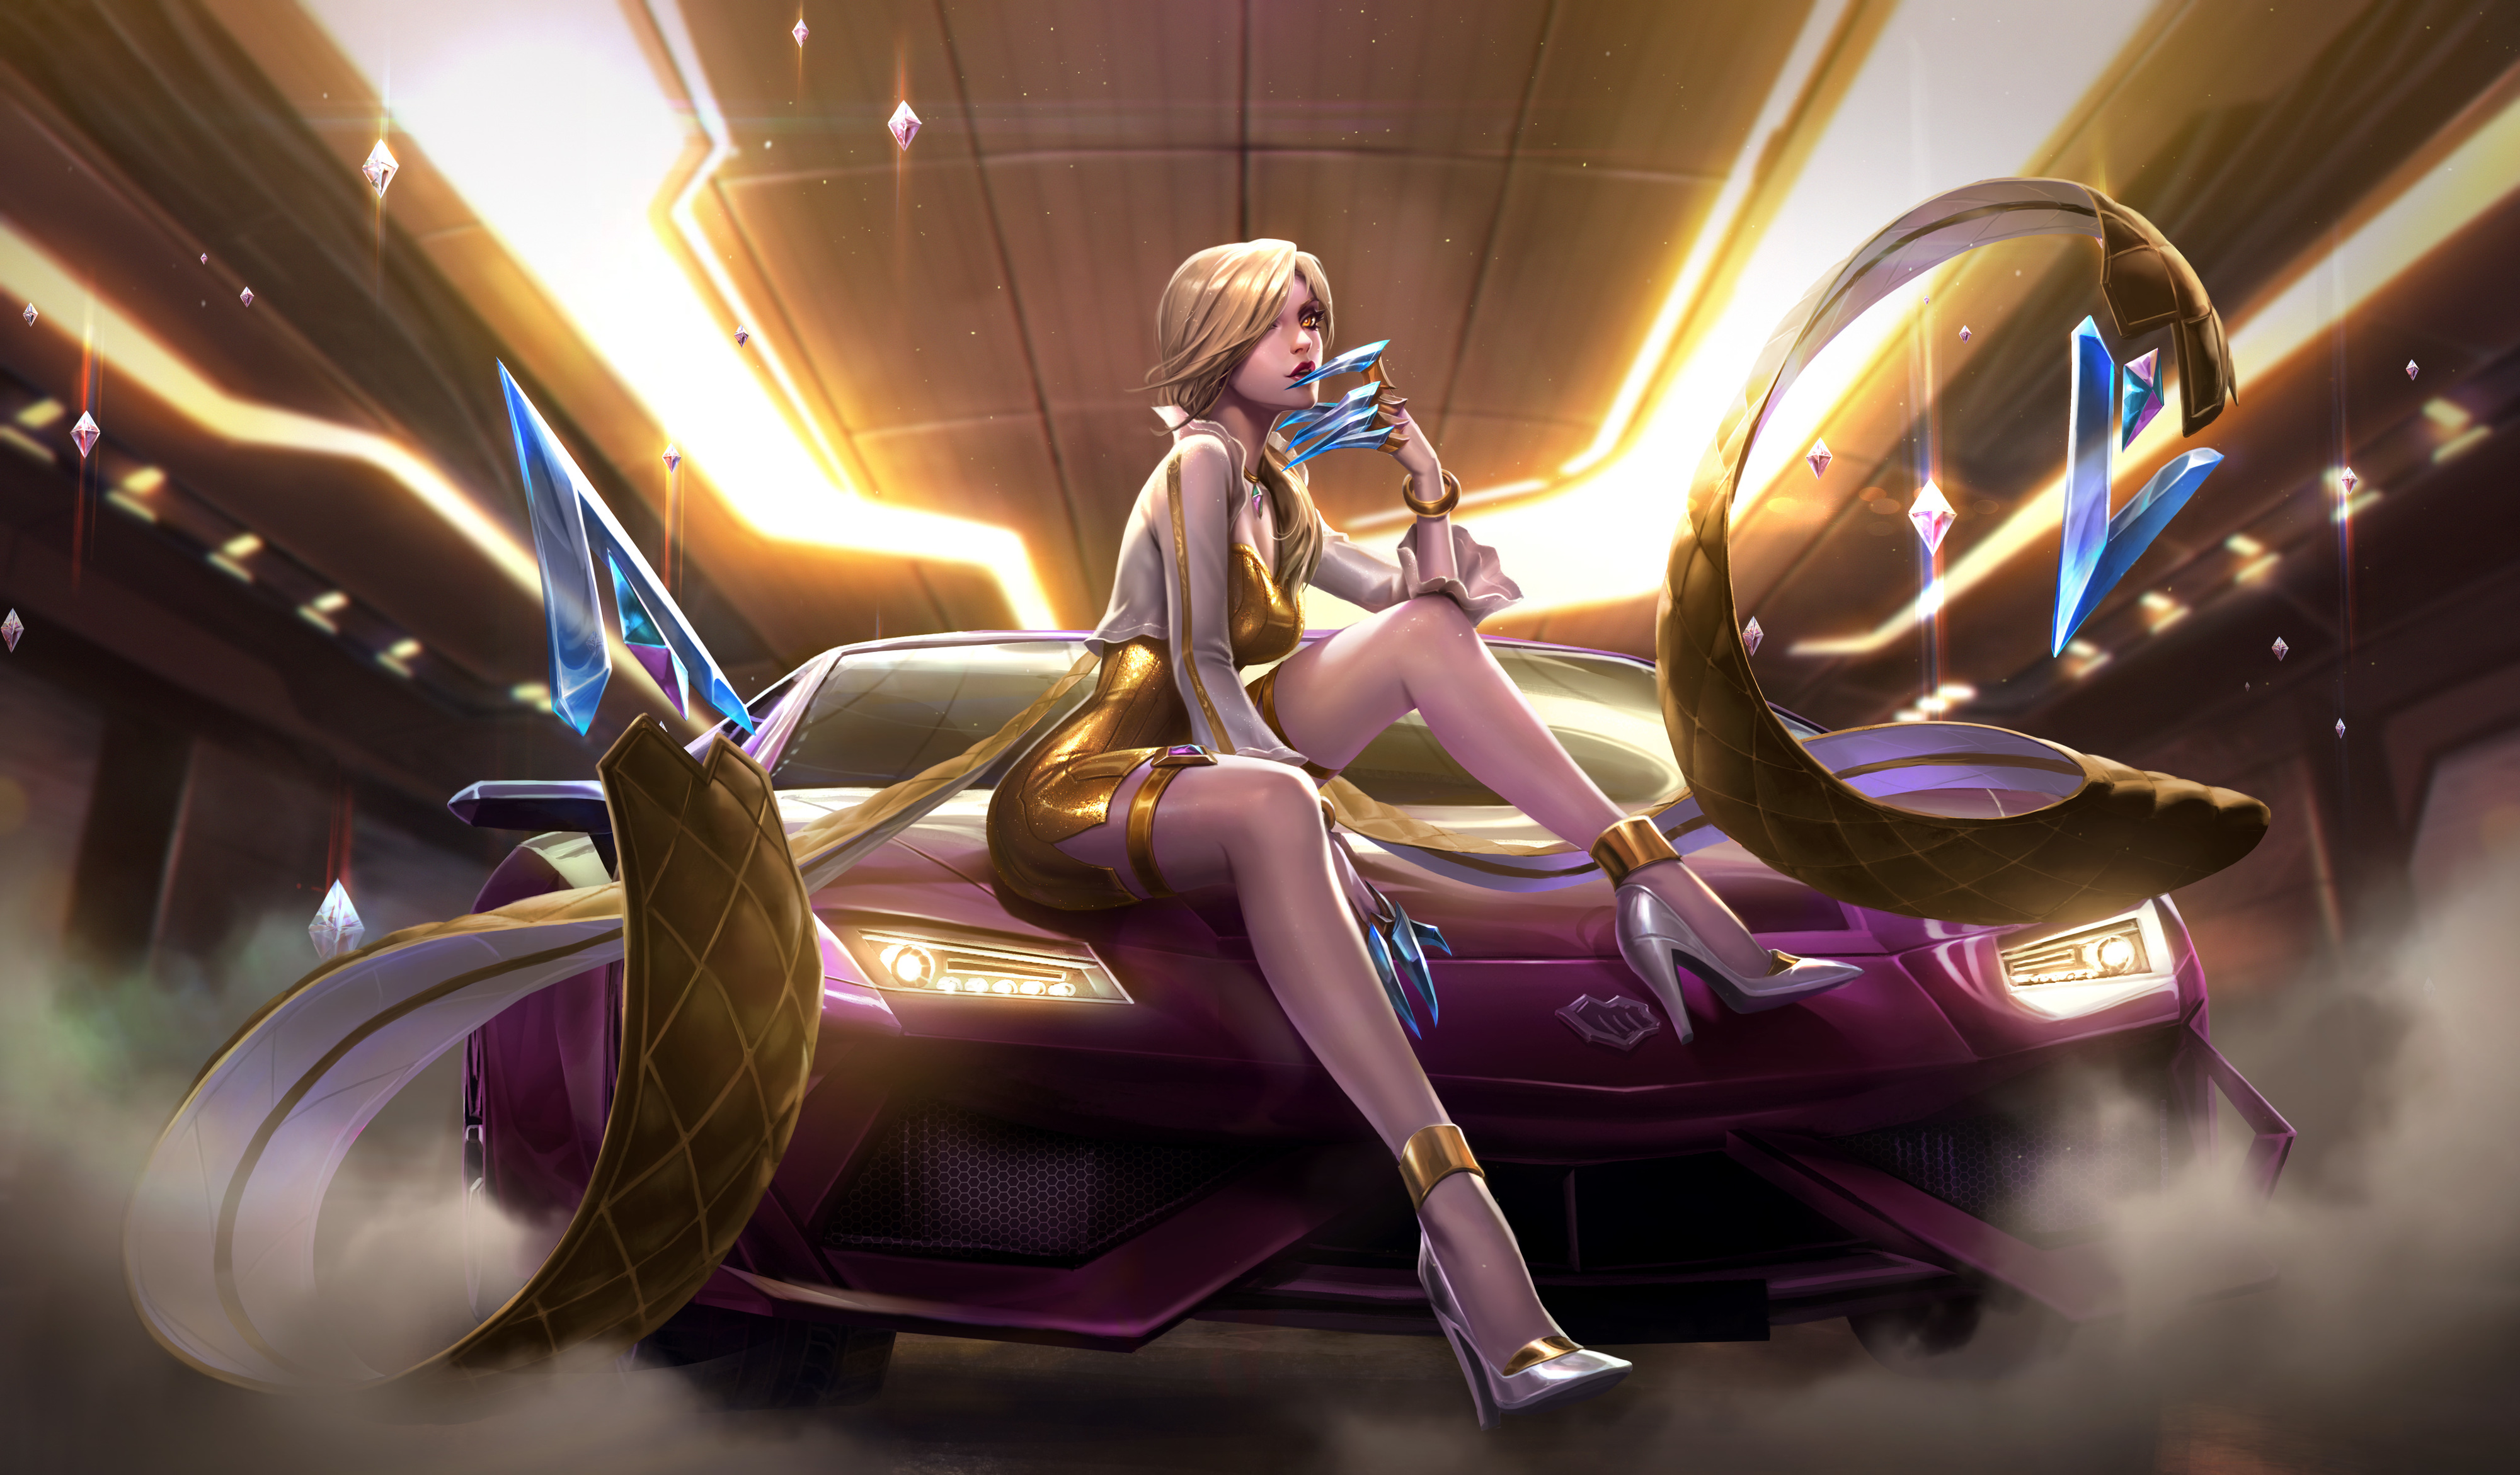 General 4000x2342 K/DA Evelynn (League of Legends) League of Legends tunnel Riot Games video game characters women with cars